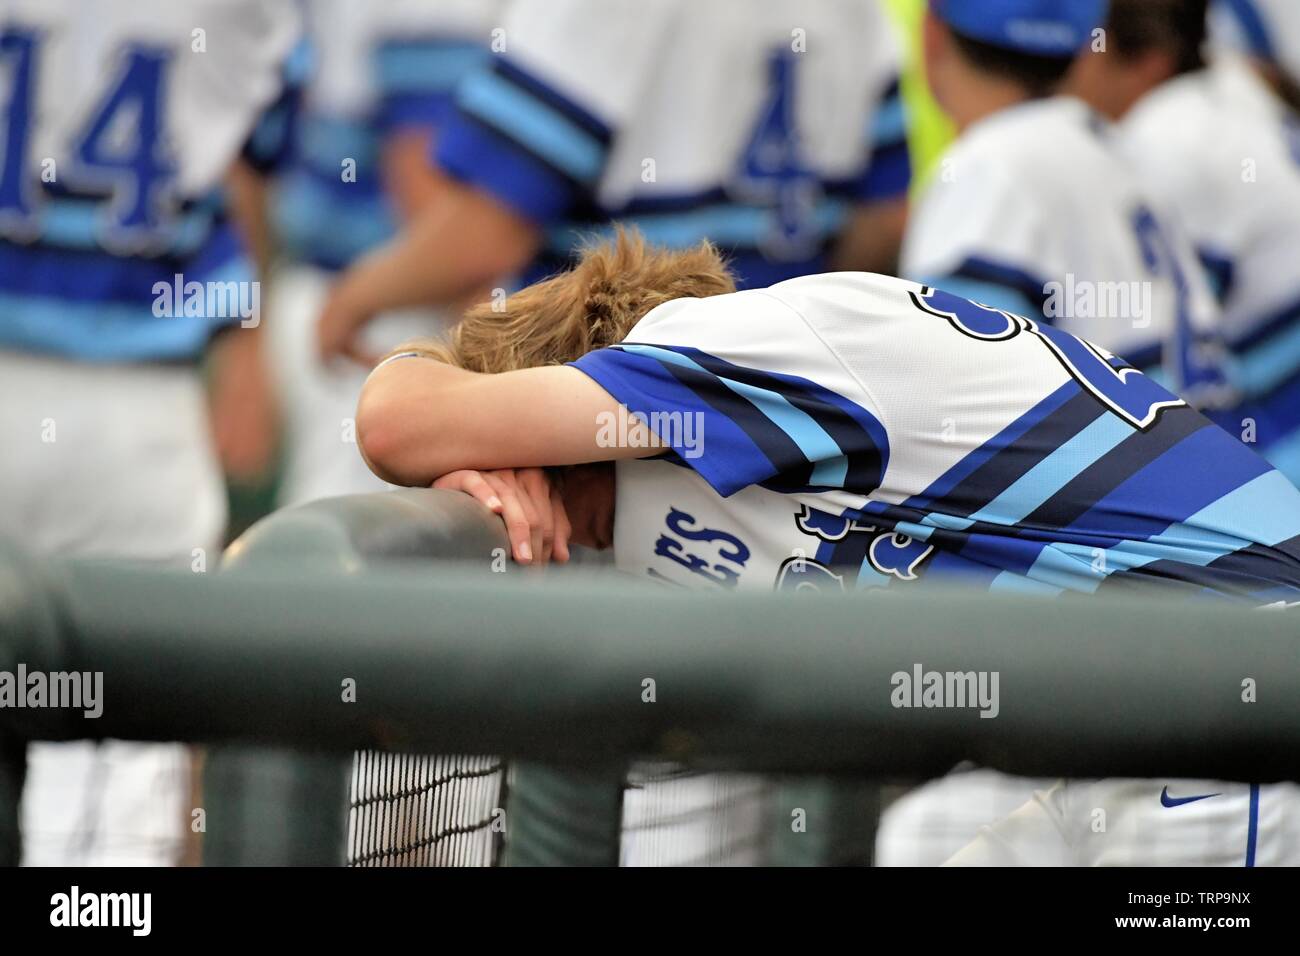 Player reacting to his team's loss in a state championship title game. USA. Stock Photo